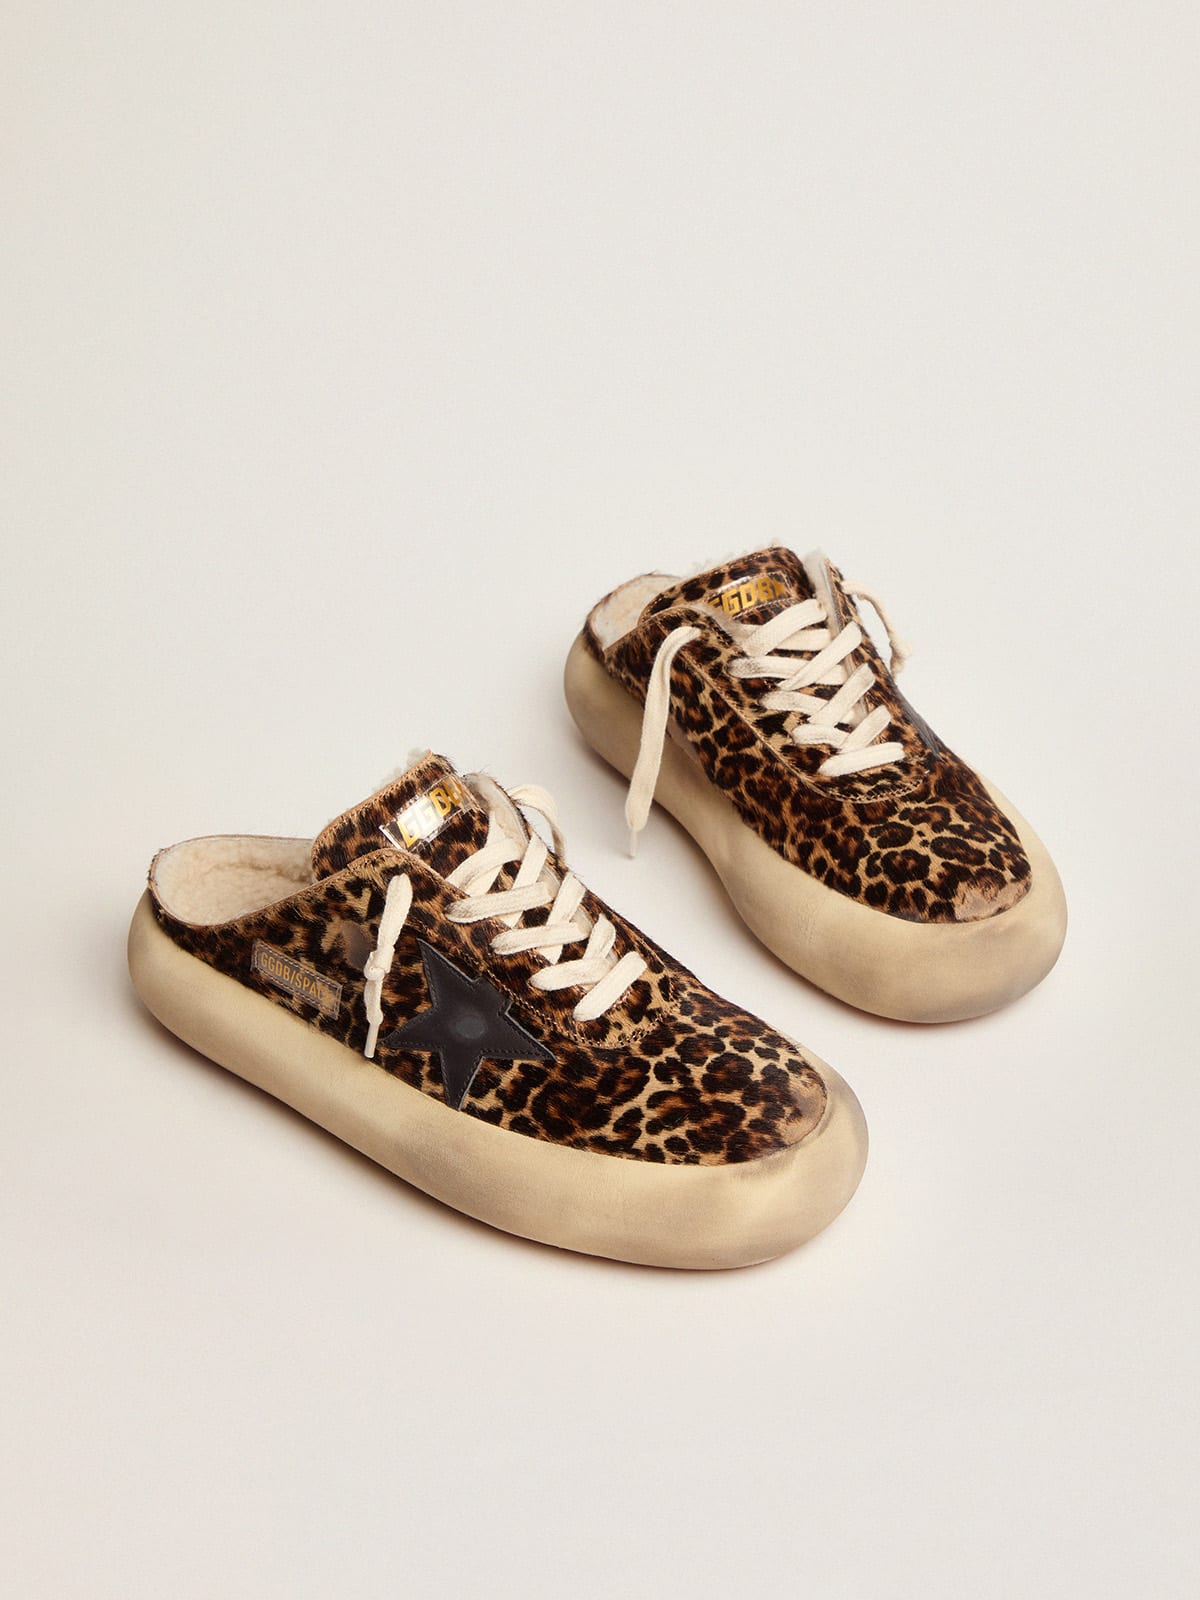 Golden Goose - Space-Star Sabot shoes in animal-print pony skin with shearling lining in 